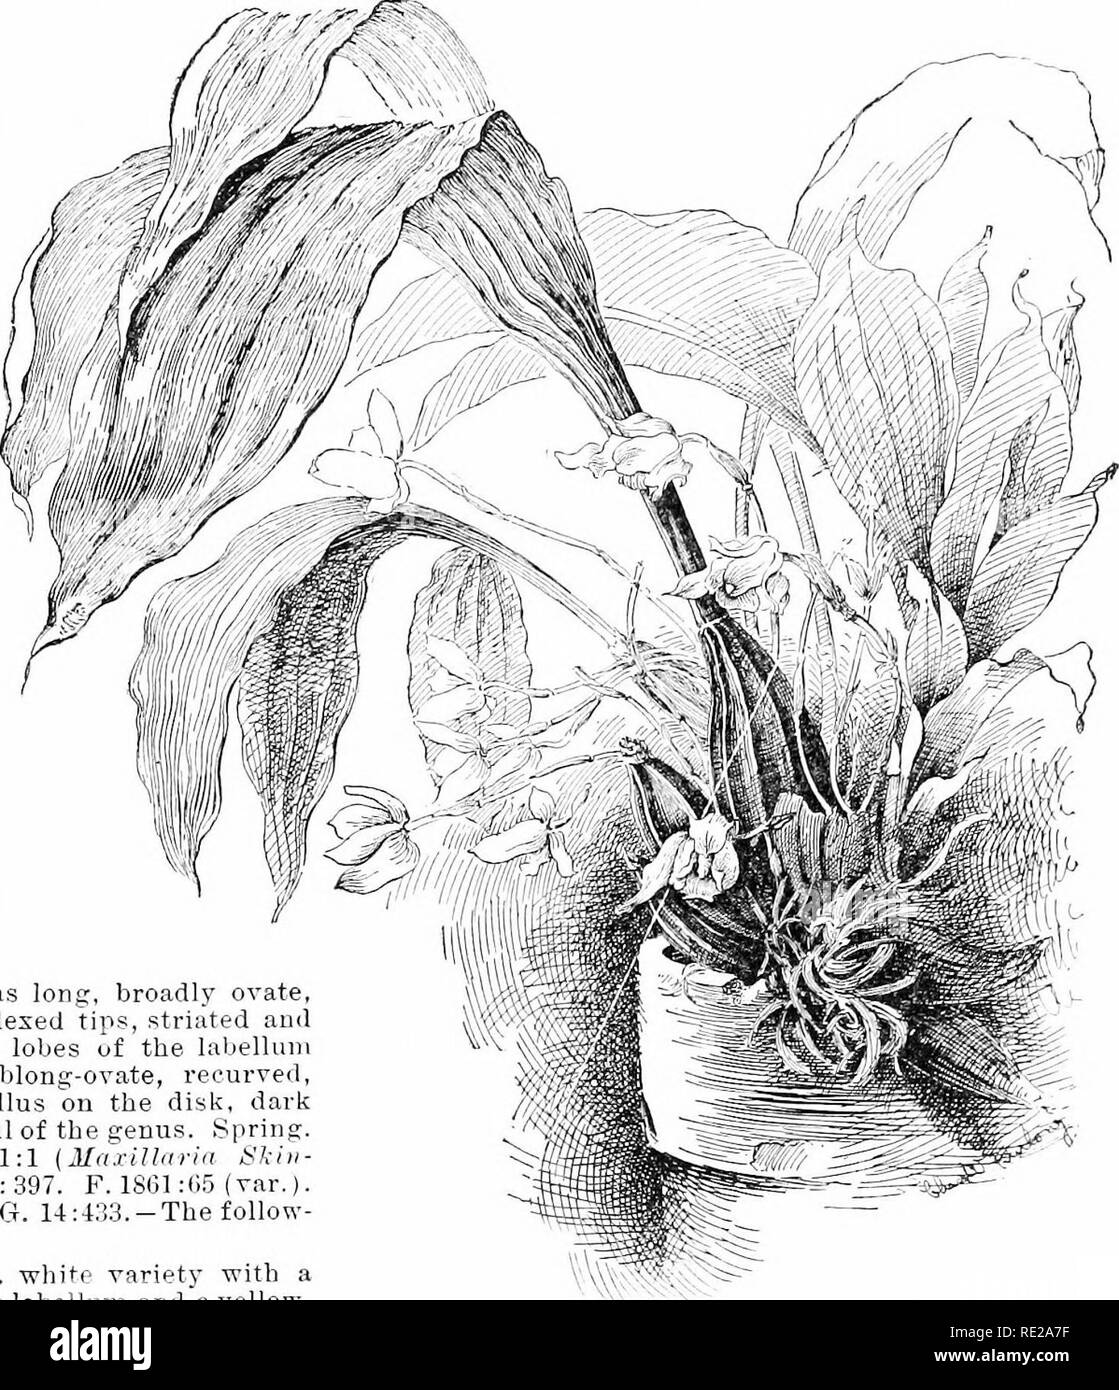 . Cyclopedia of American horticulture, comprising suggestions for cultivation of horticultural plants, descriptions of the species of fruits, vegetables, flowers, and ornamental plants sold in the United States and Canada, together with geographical and biographical sketches. Gardening. LYCASTE LYCASTE 953 compressed, crenulate; callus tongue-shaped, coucave. Often the parts of the tlower are more or less spotted and hairy iu places. July, Aug. Colombia. Gt. l'32l. 5. l&amp;nipes, Lindl. Pseudobulbs large: Ivs. lanceo- late, 12-18 in. long: tls. solitary, as many as 1;3 on a plant, creamy whit Stock Photo